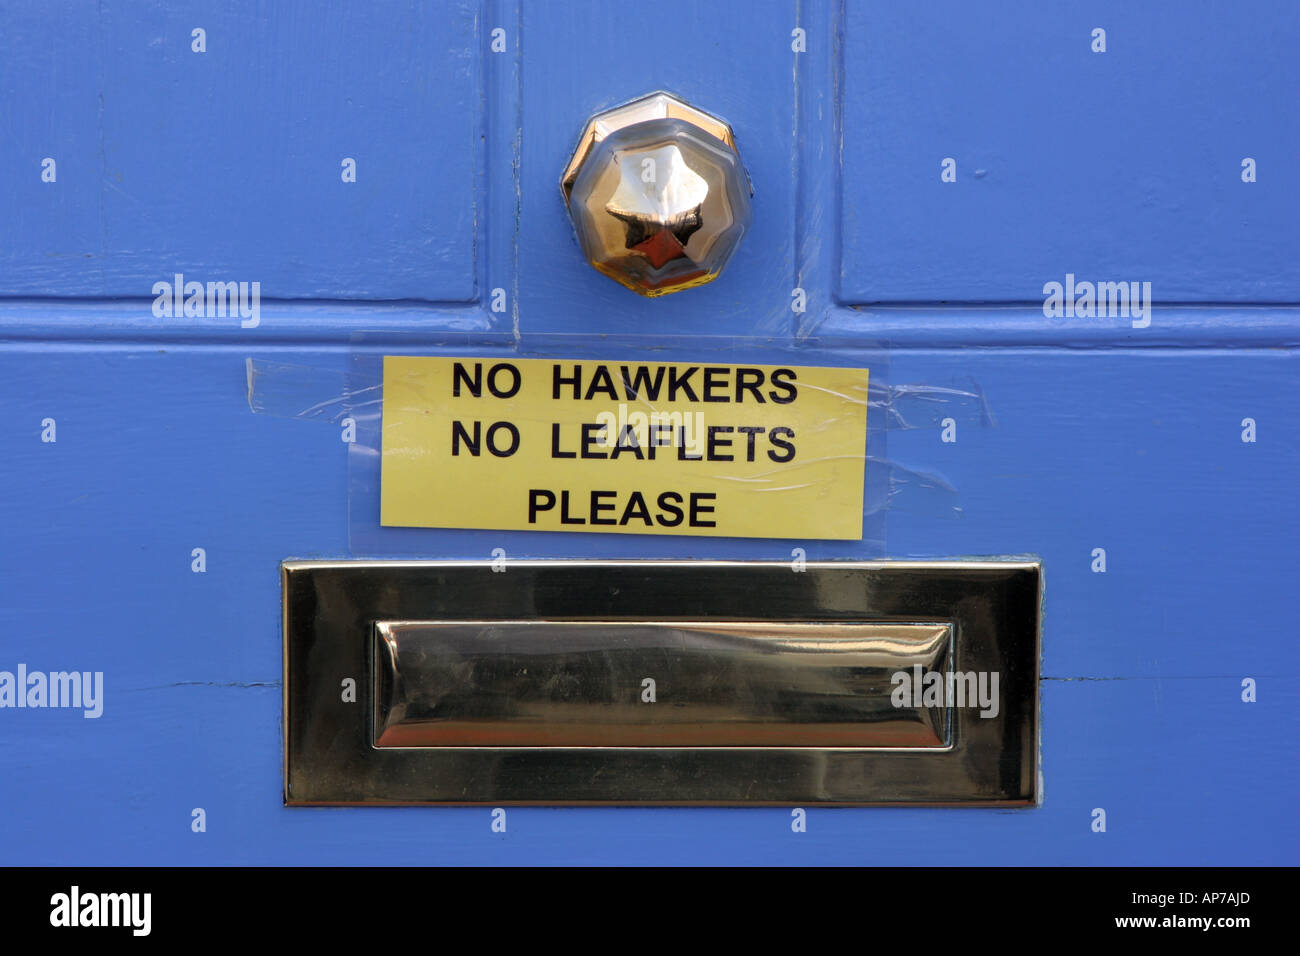 No Hawkers or leaflets please Stock Photo